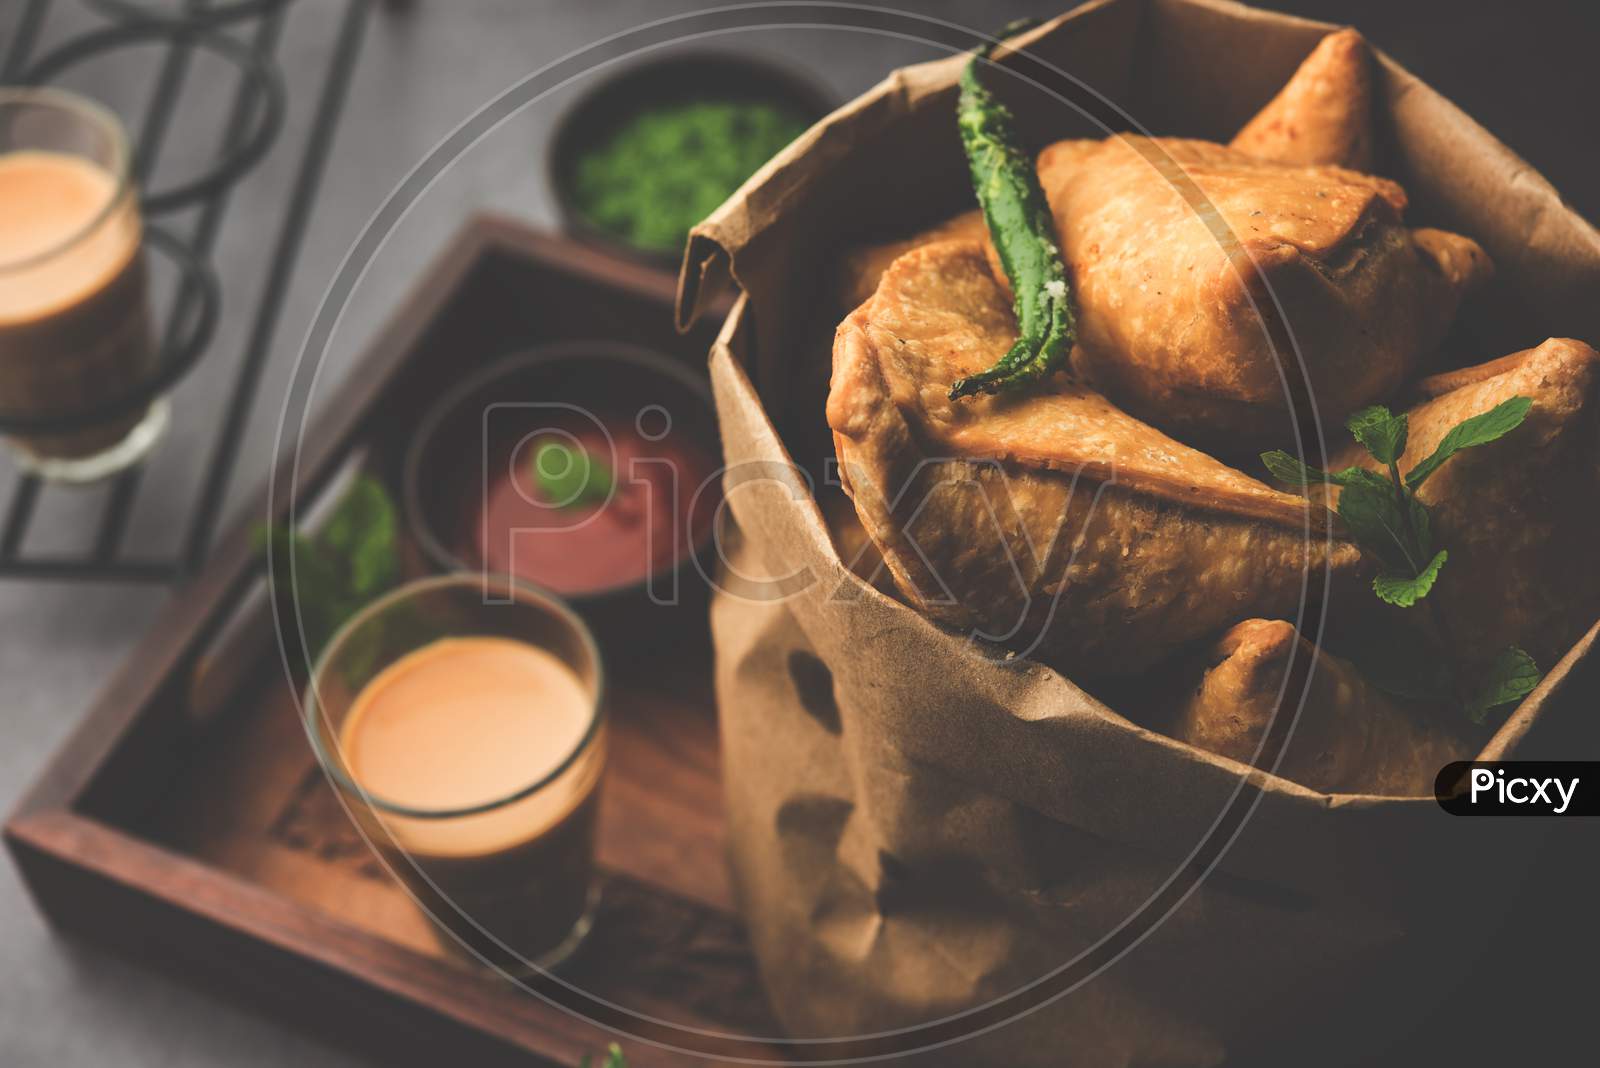 Samosa Snack Is An Indian Deep Fried Pastry With A Spiced Filling Usually Made With Potatoes, Spices And Herb